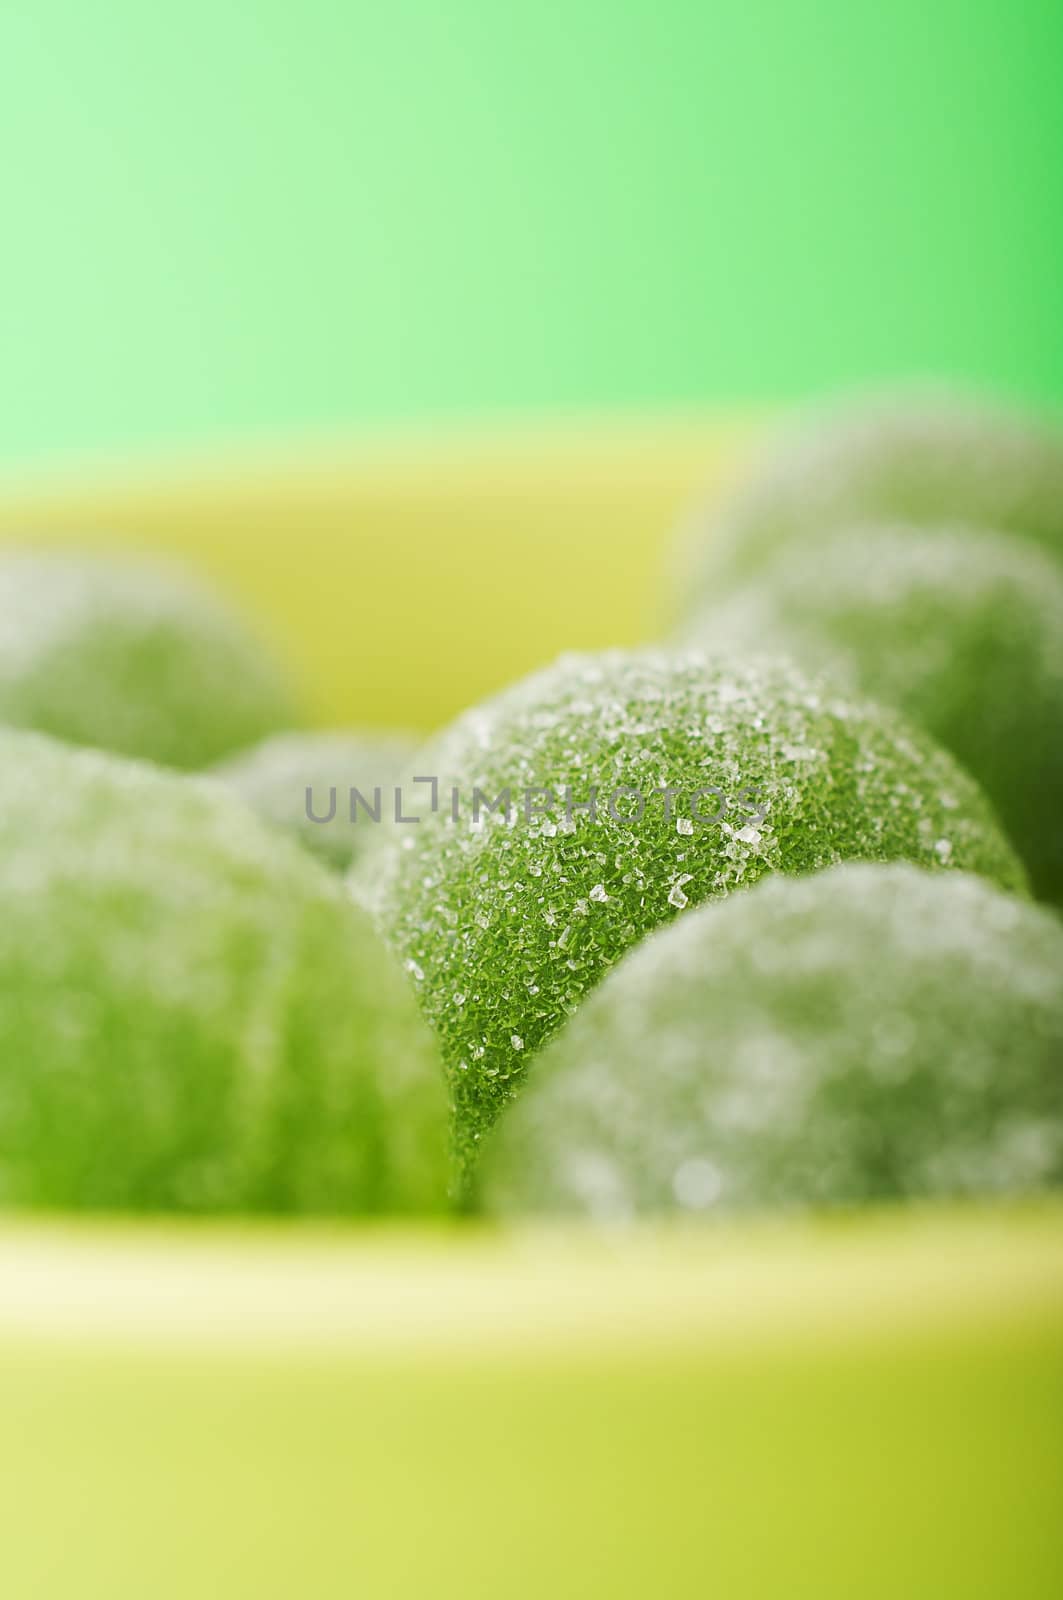 Green marmalade balls in the bowl on the green background